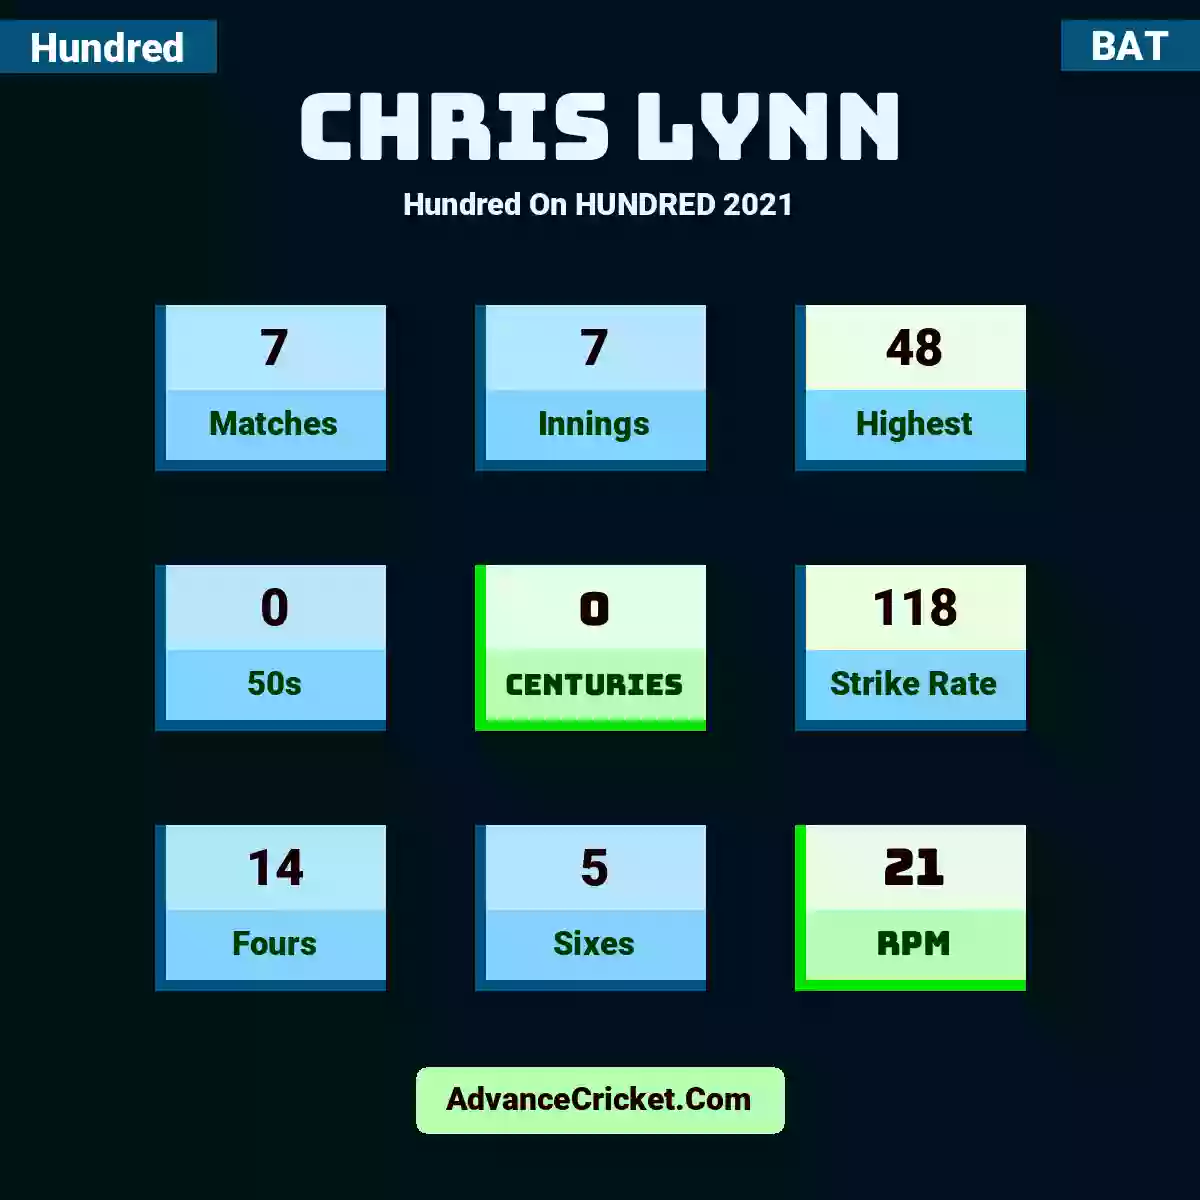 Chris Lynn Hundred  On HUNDRED 2021, Chris Lynn played 7 matches, scored 48 runs as highest, 0 half-centuries, and 0 centuries, with a strike rate of 118. C.Lynn hit 14 fours and 5 sixes, with an RPM of 21.